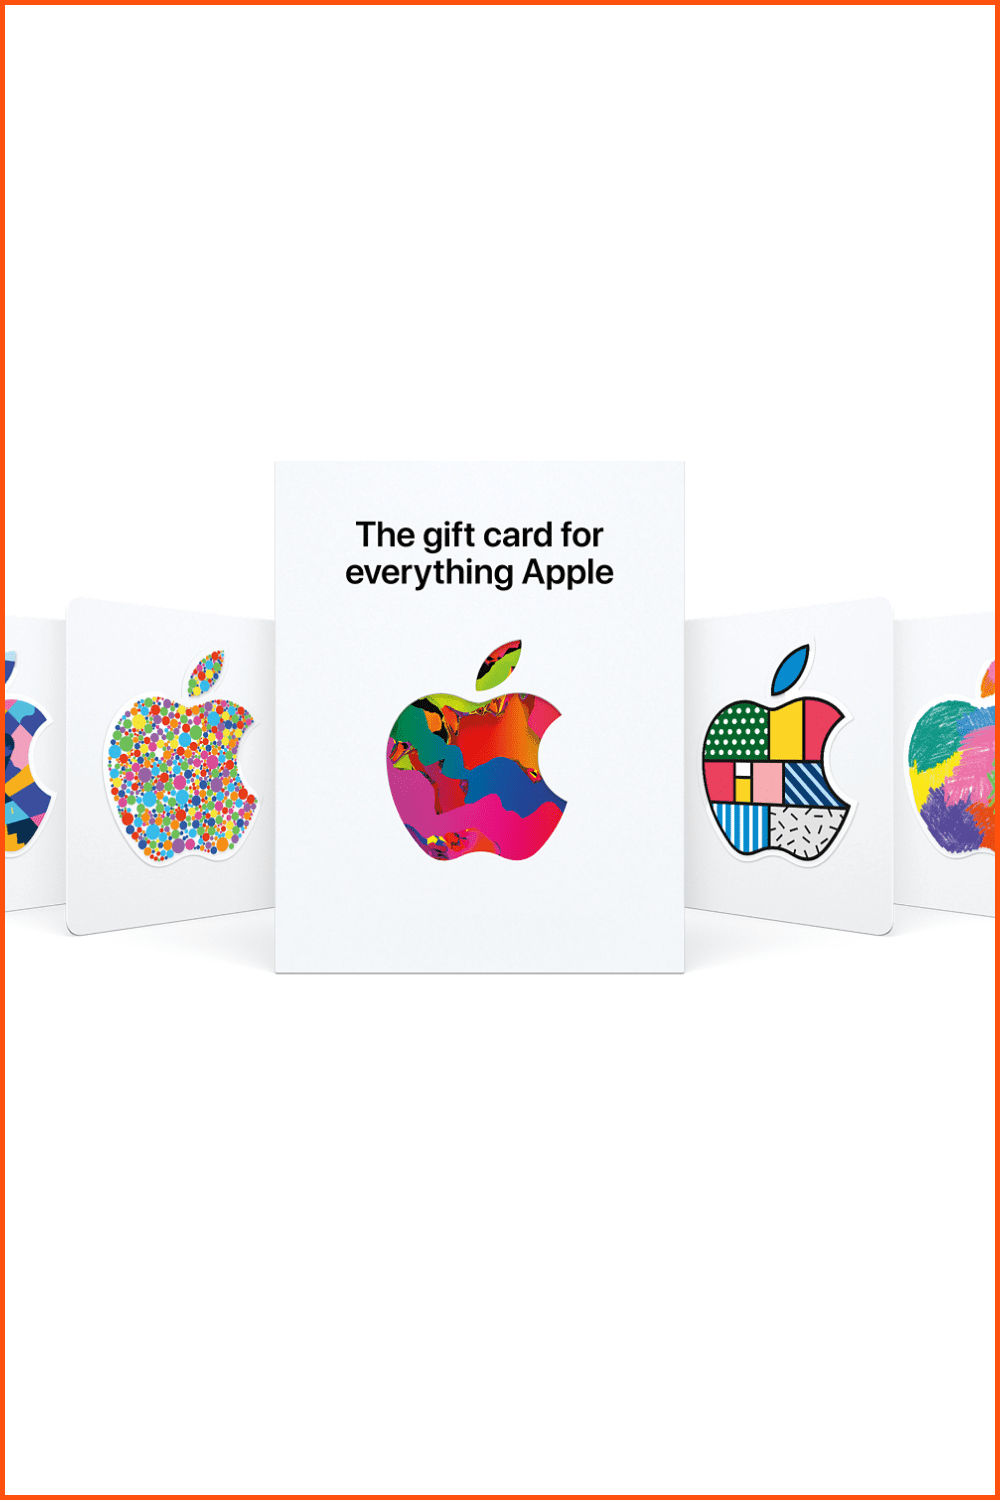 App Store & iTunes Gift Cards by Mail.